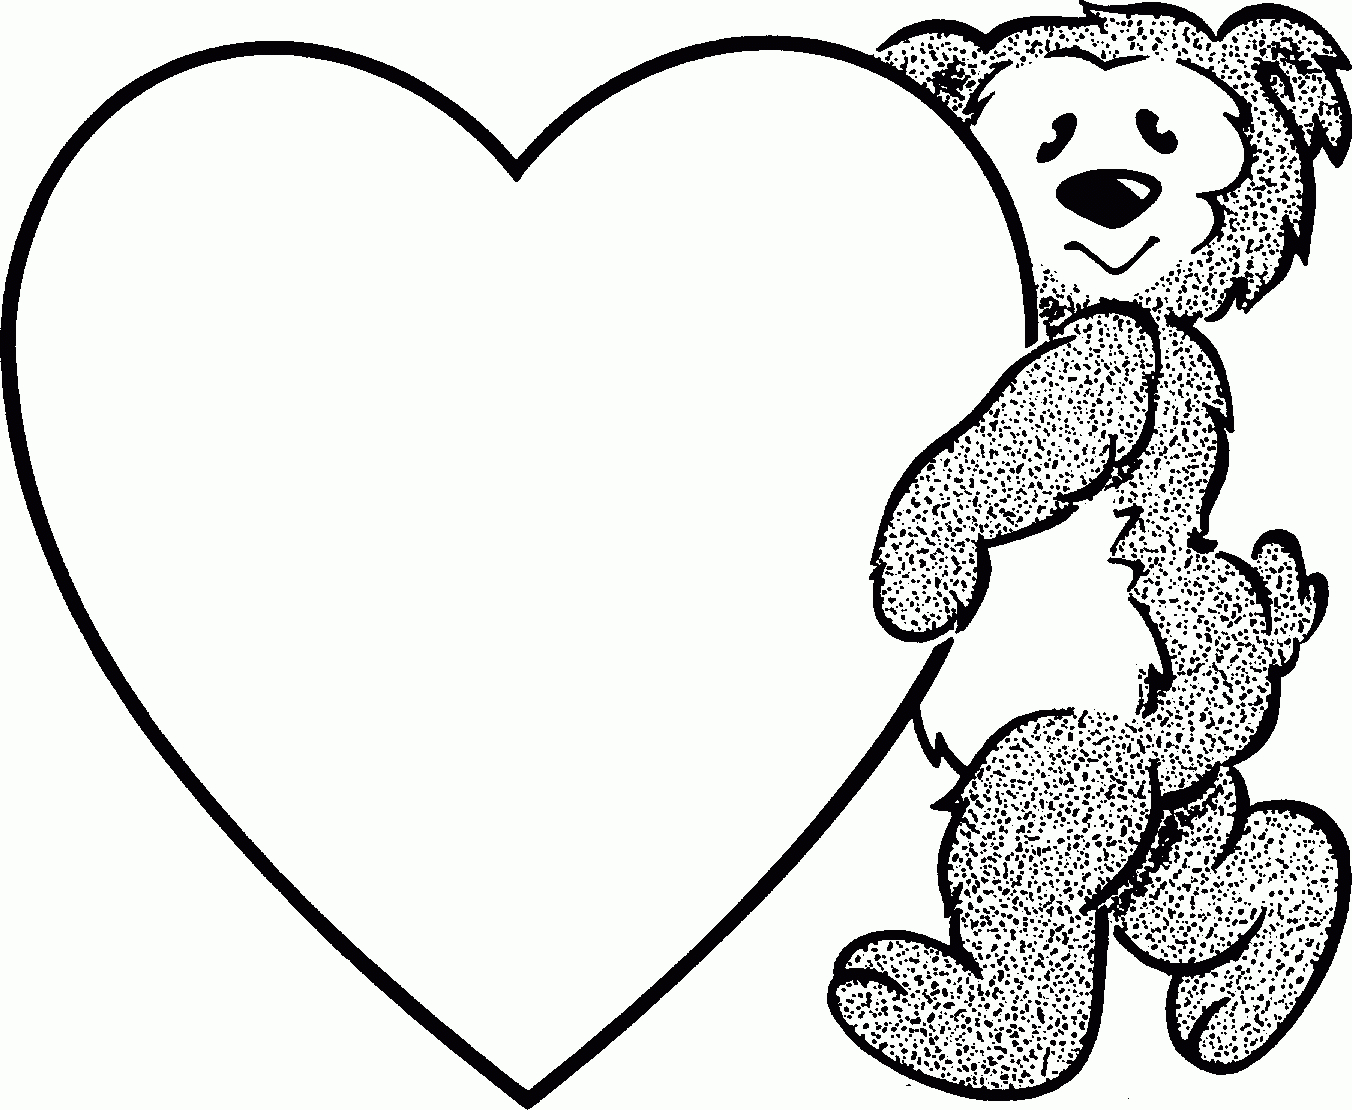 Free Printable Valentine Coloring Pages For Kids | Pinterest | Free - Free Printable Heart Coloring Pages